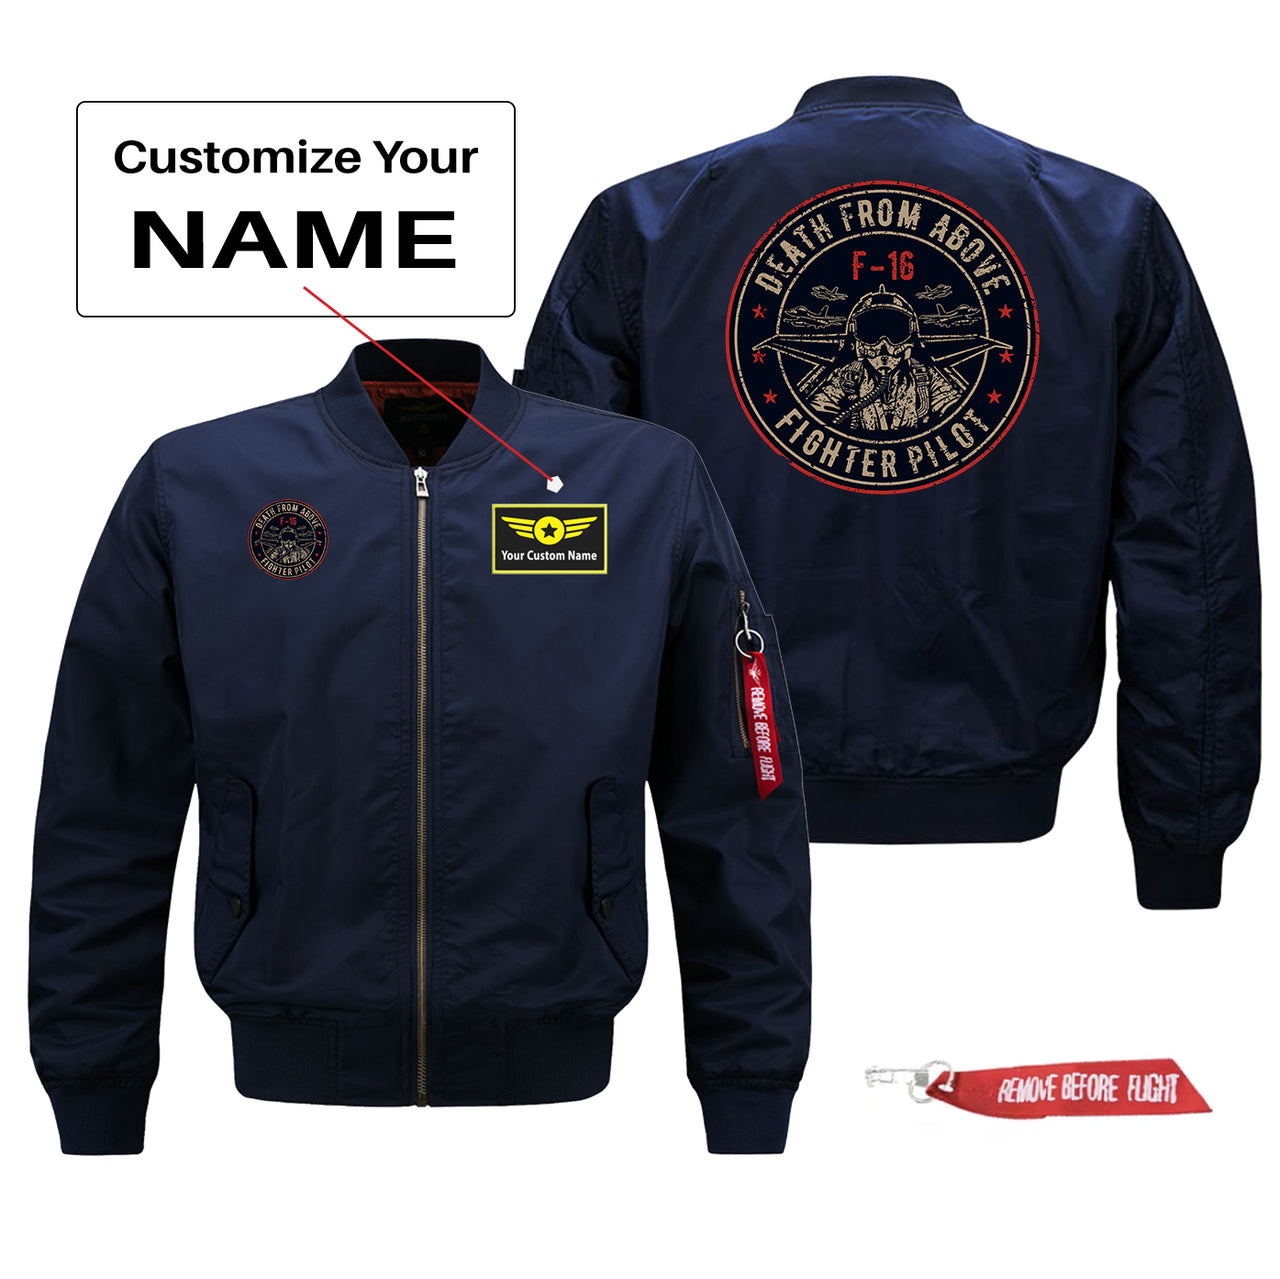 Fighting Falcon F16 - Death From Above Designed Pilot Jackets (Customizable)